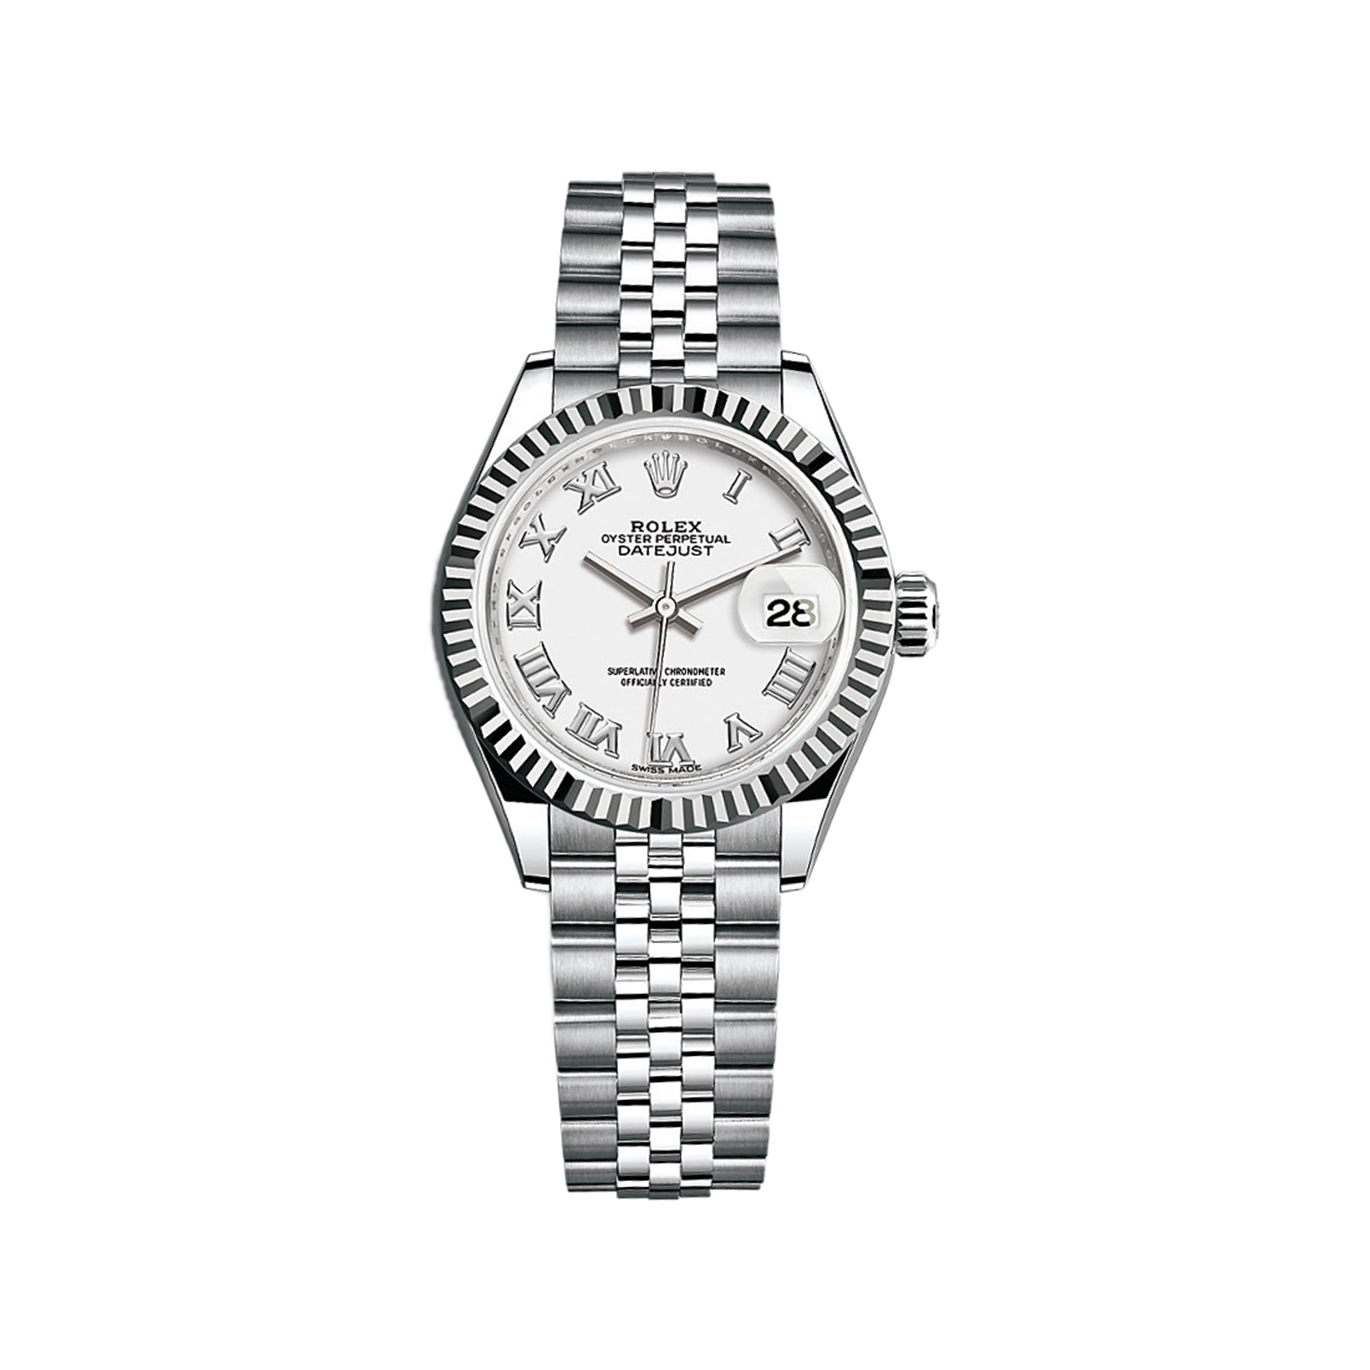 Lady-Datejust 28 279174 White Gold & Stainless Steel Watch (White)